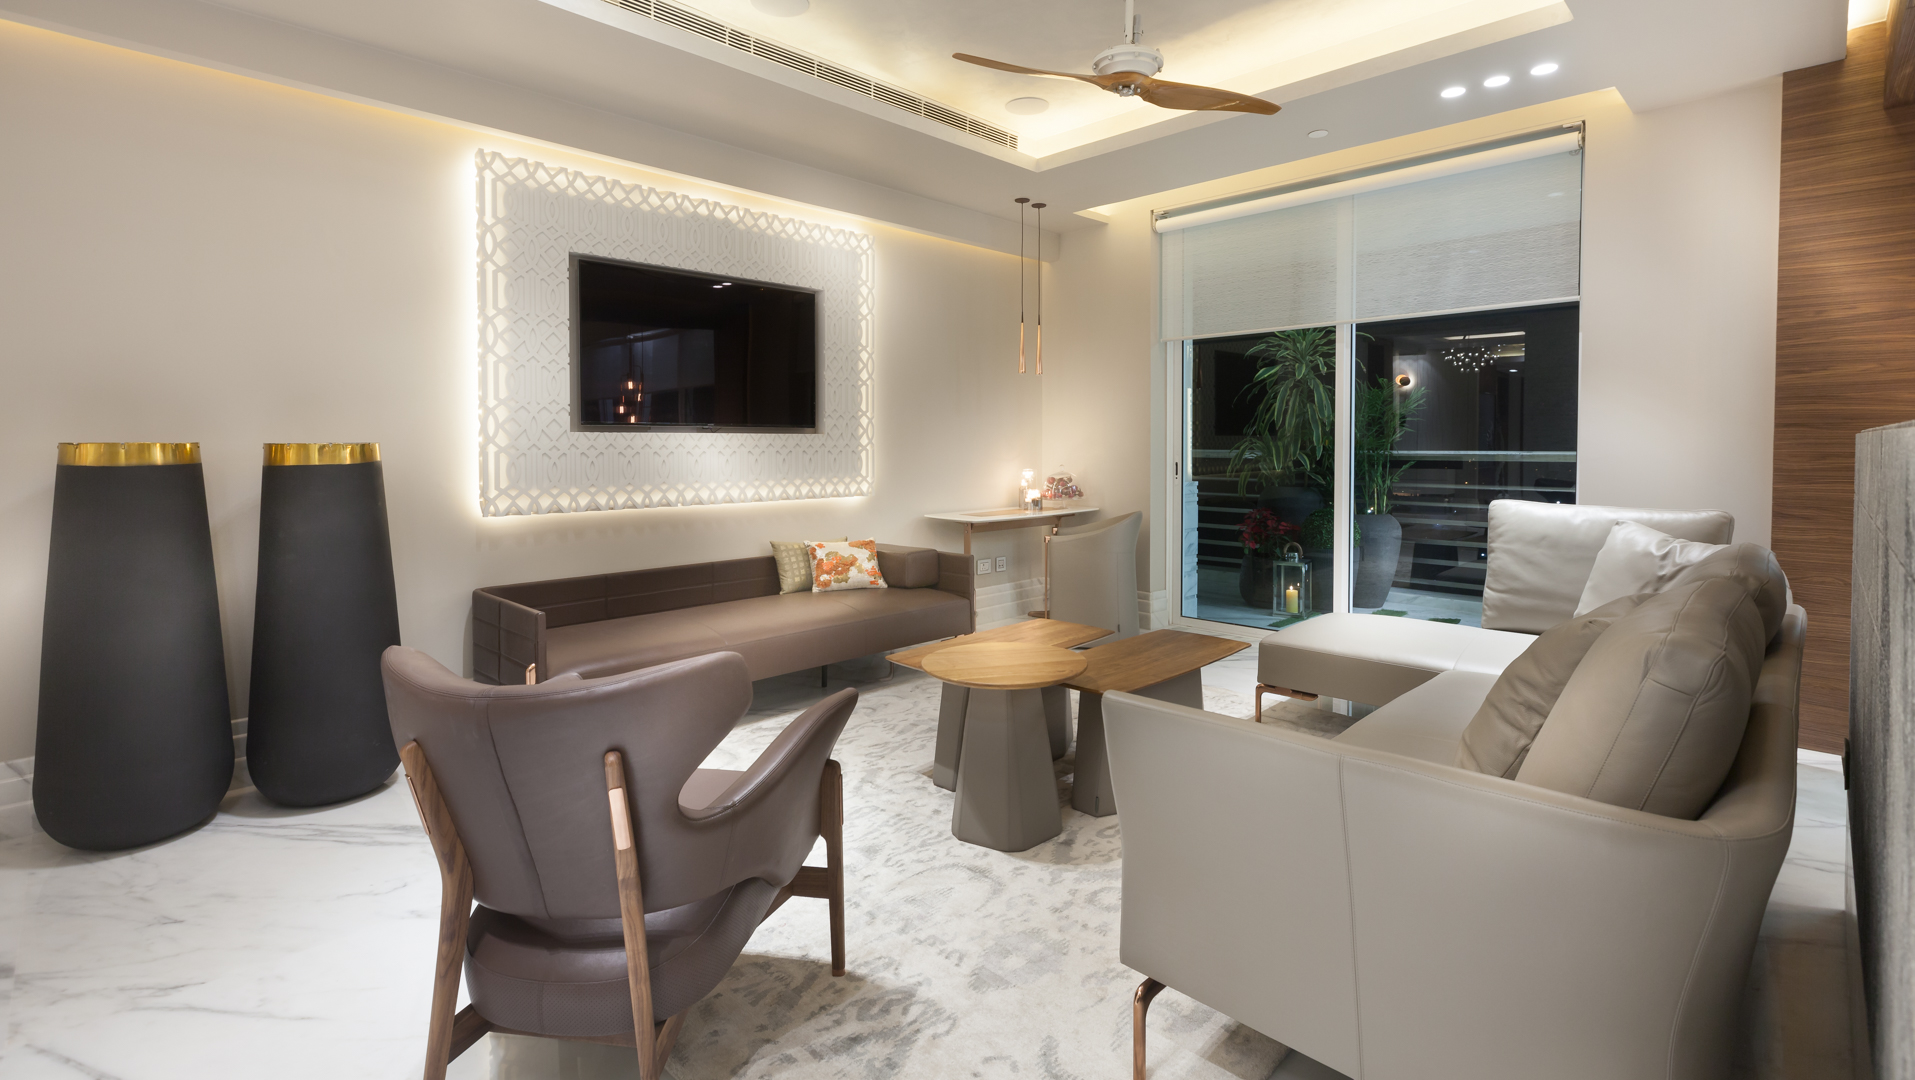 Design of a Living Room by Essentia Environments